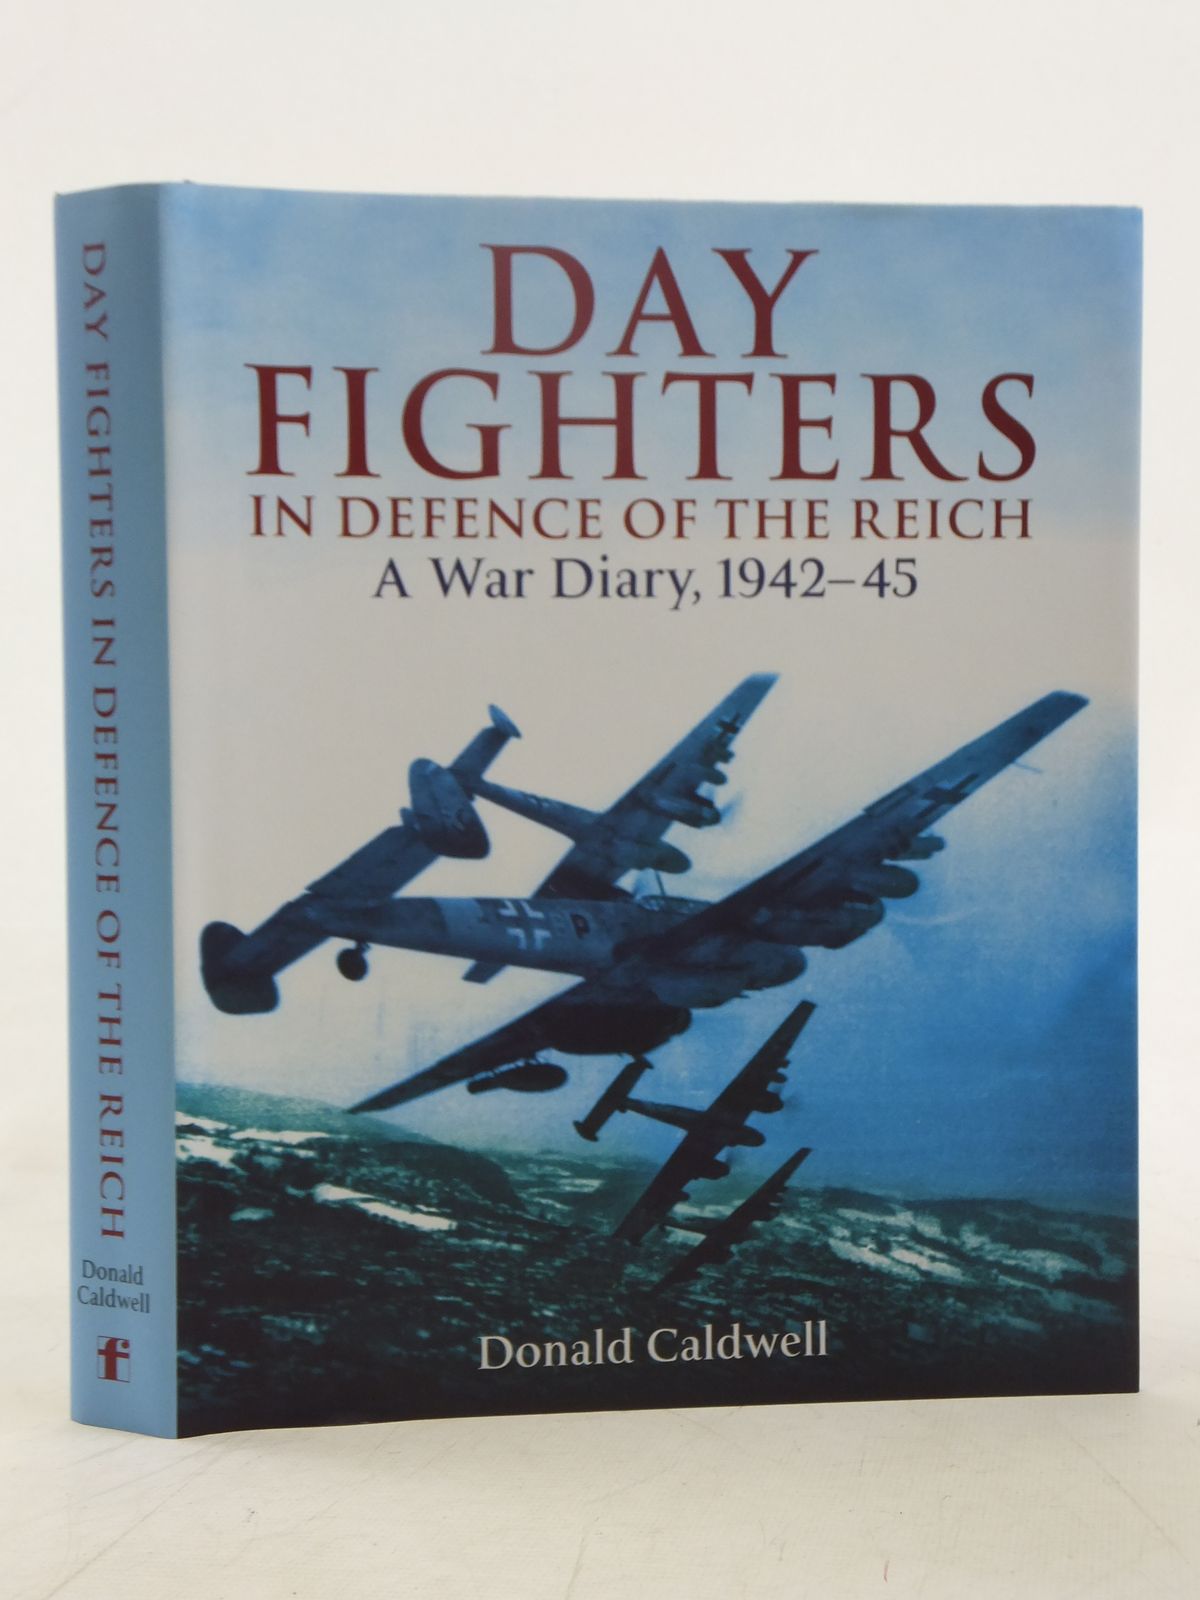 Photo of DAY FIGHTERS IN DEFENCE OF THE REICH A WAR DIARY, 1942-45 written by Caldwell, Donald published by Frontline Books (STOCK CODE: 2118126)  for sale by Stella & Rose's Books